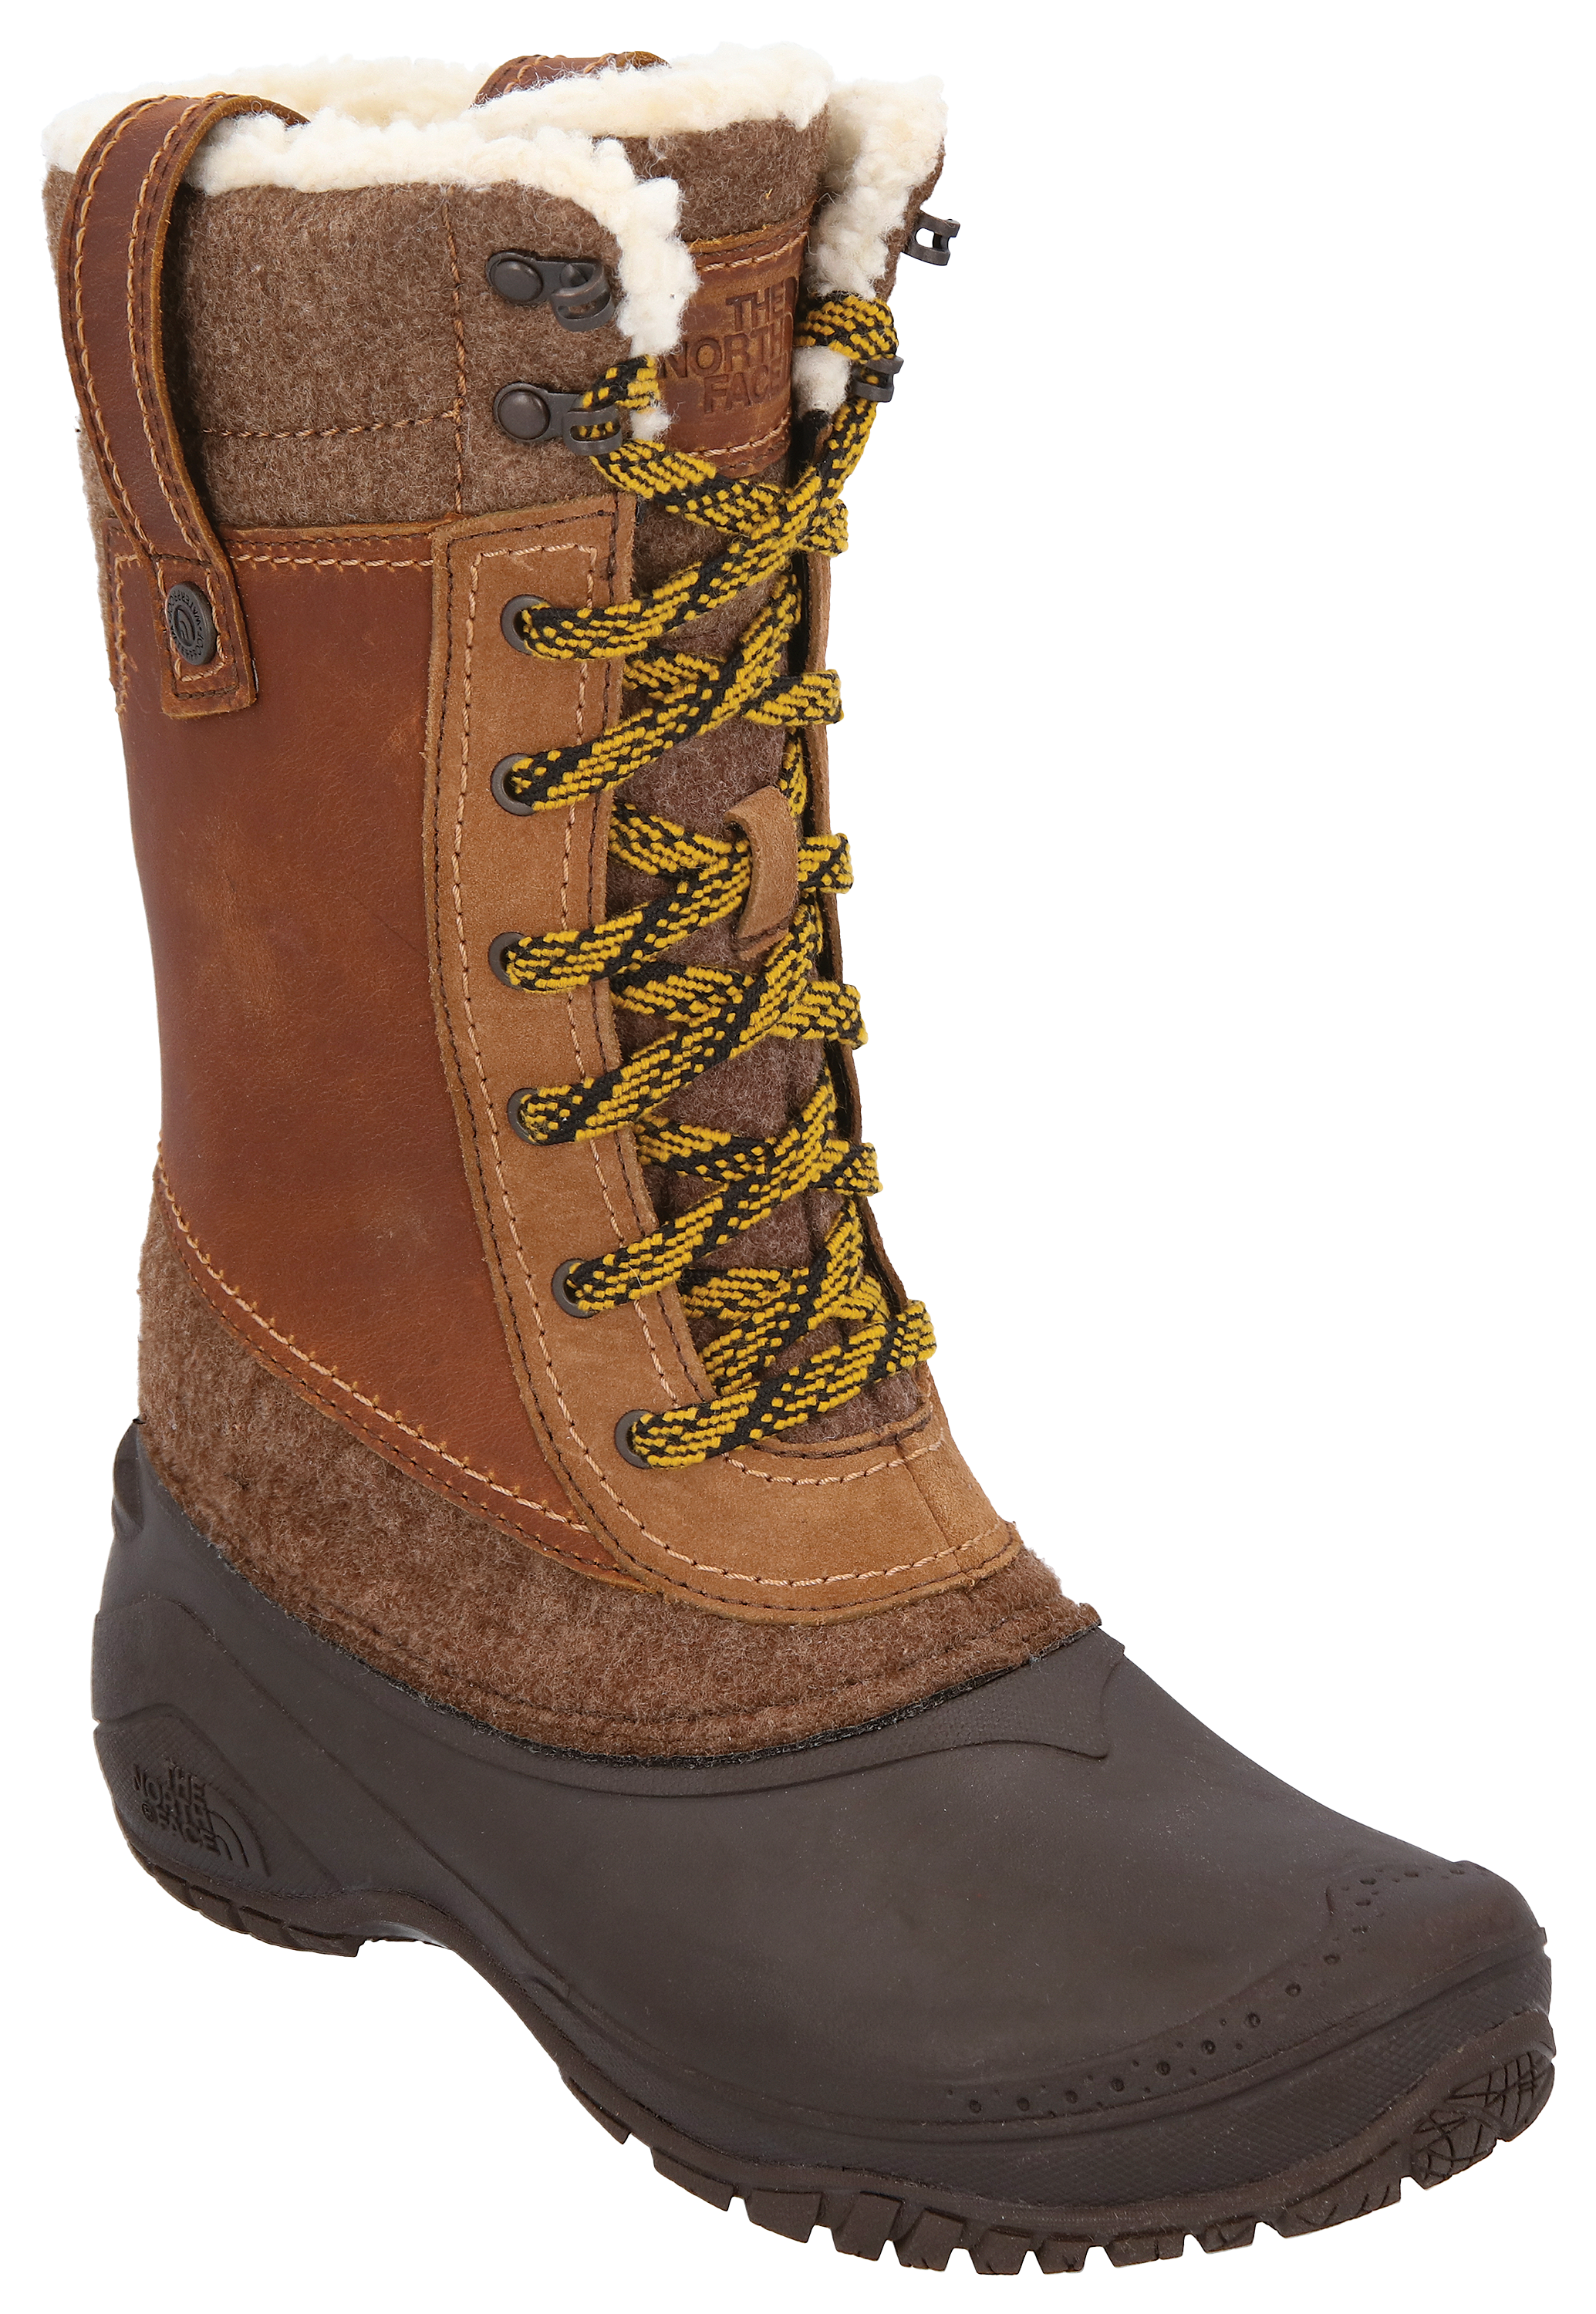 Laughter humor Stewart island The North Face Shellista III Mid Pac Boots for Ladies | Cabela's